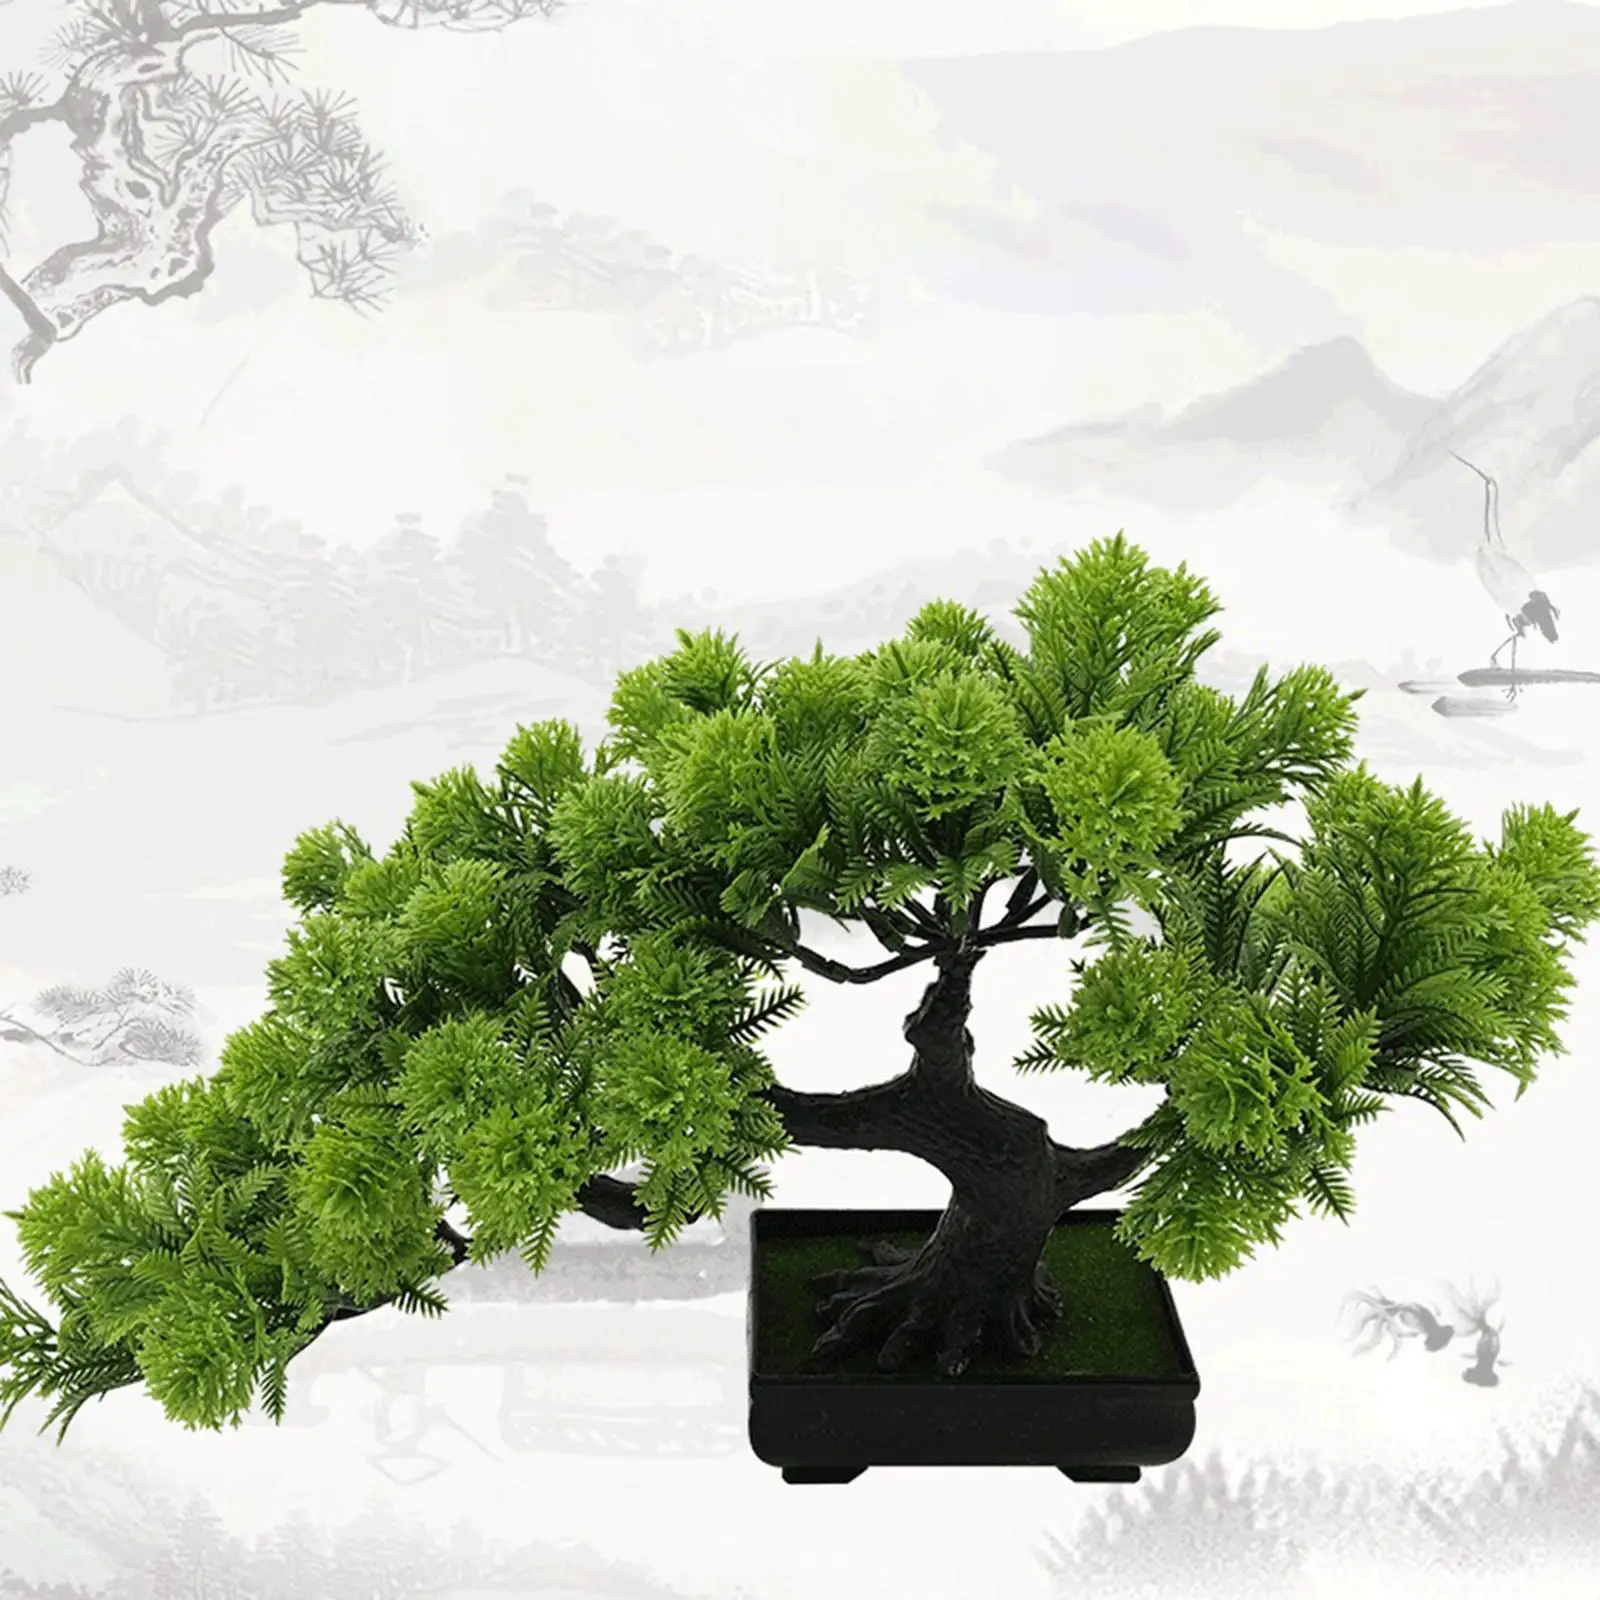 Small Artificial Bonsai Tree Simulation Potted Plants Desktop Display Tree for Home Bedroom Table Living Room Indoor Decoration